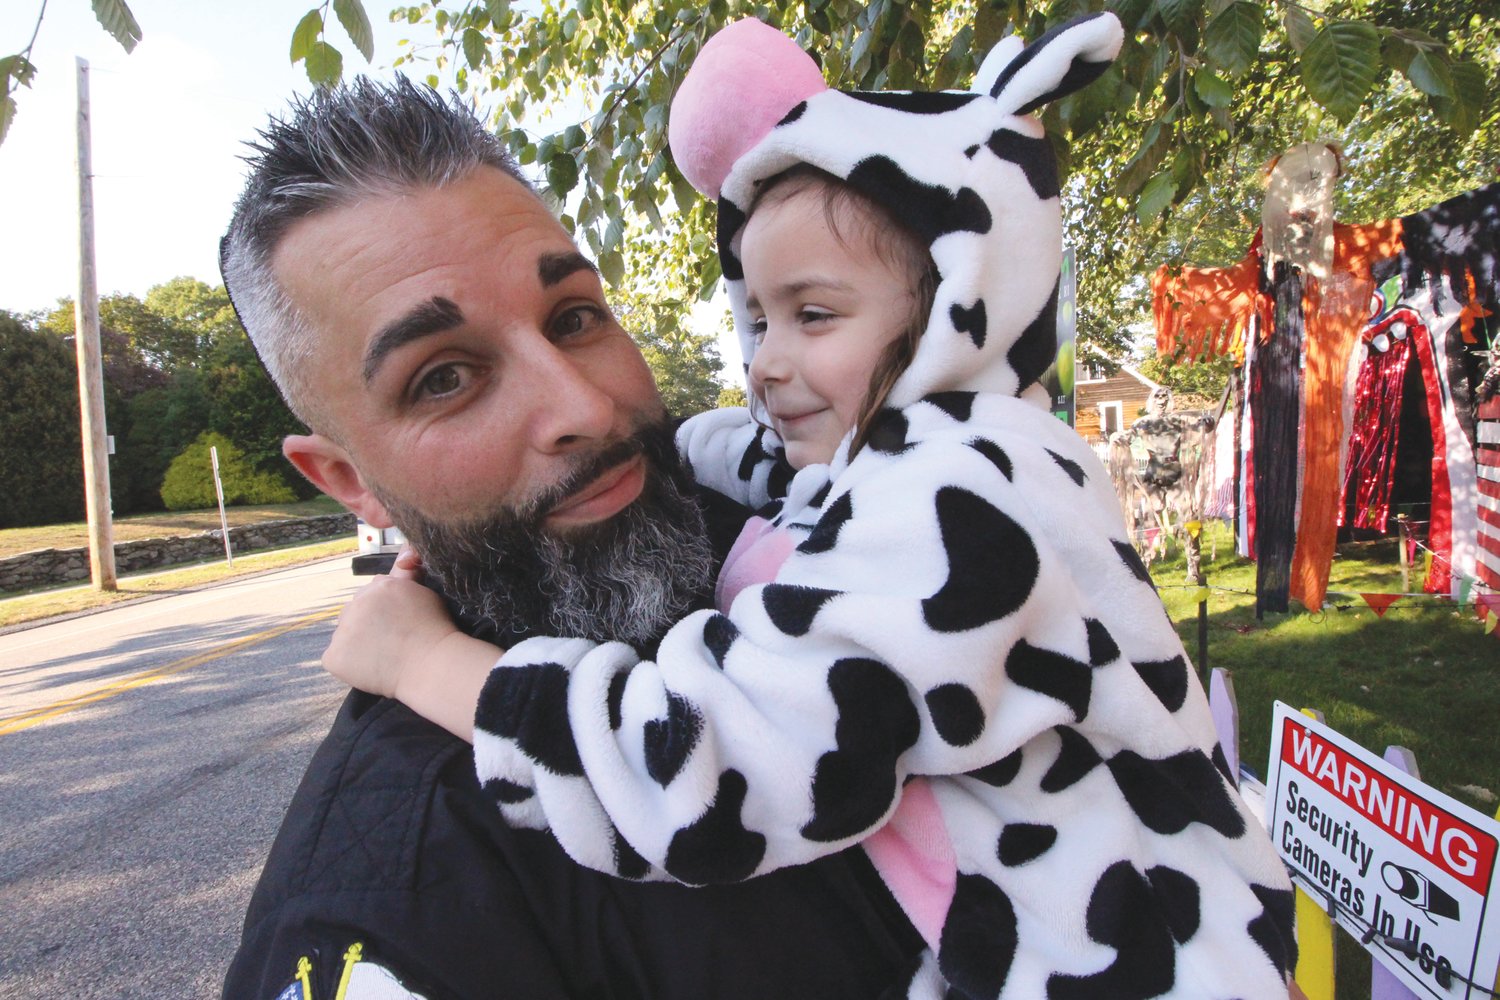 A COW GIRL:  Danny Hall with his daughter Cora outside his Halloween carnival display on Warwick Neck Avenue.